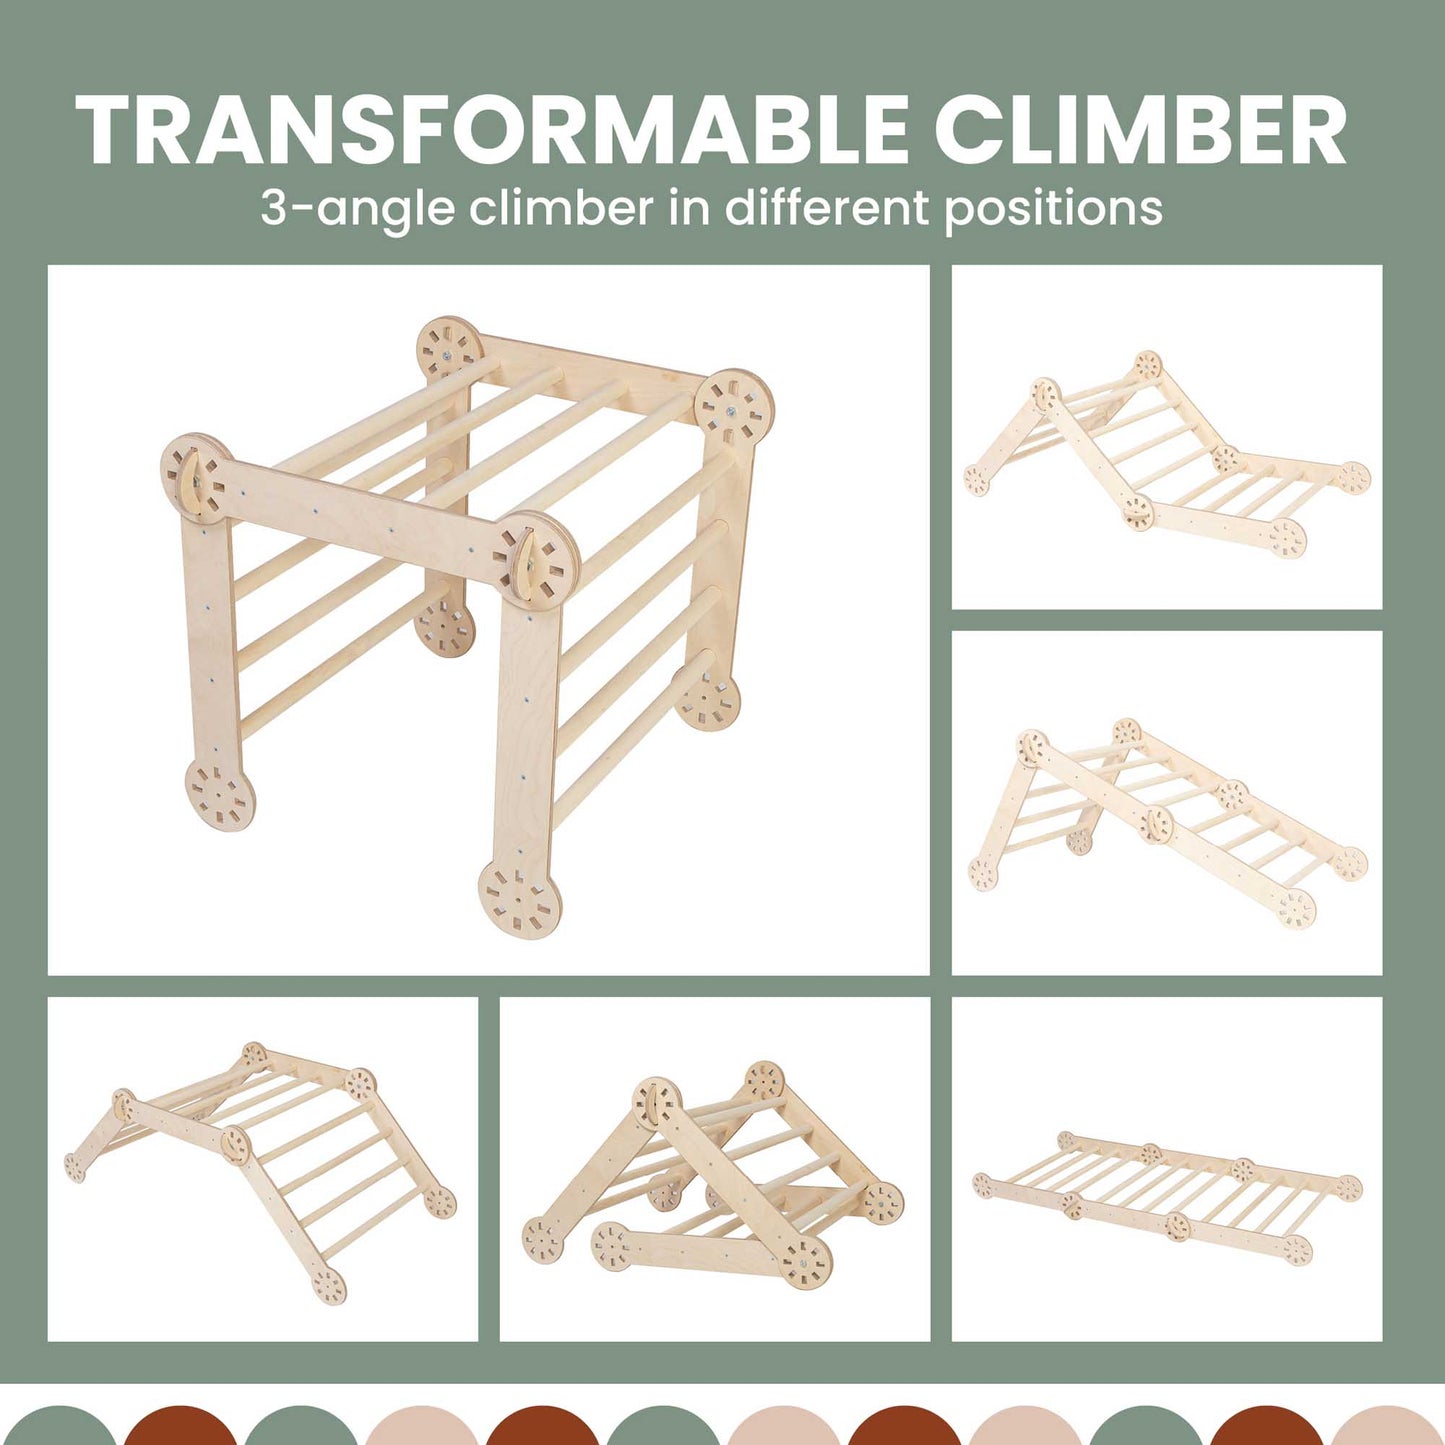 Transformable climbing cube/ table and chair  + Transformable climbing gym +  a ramp